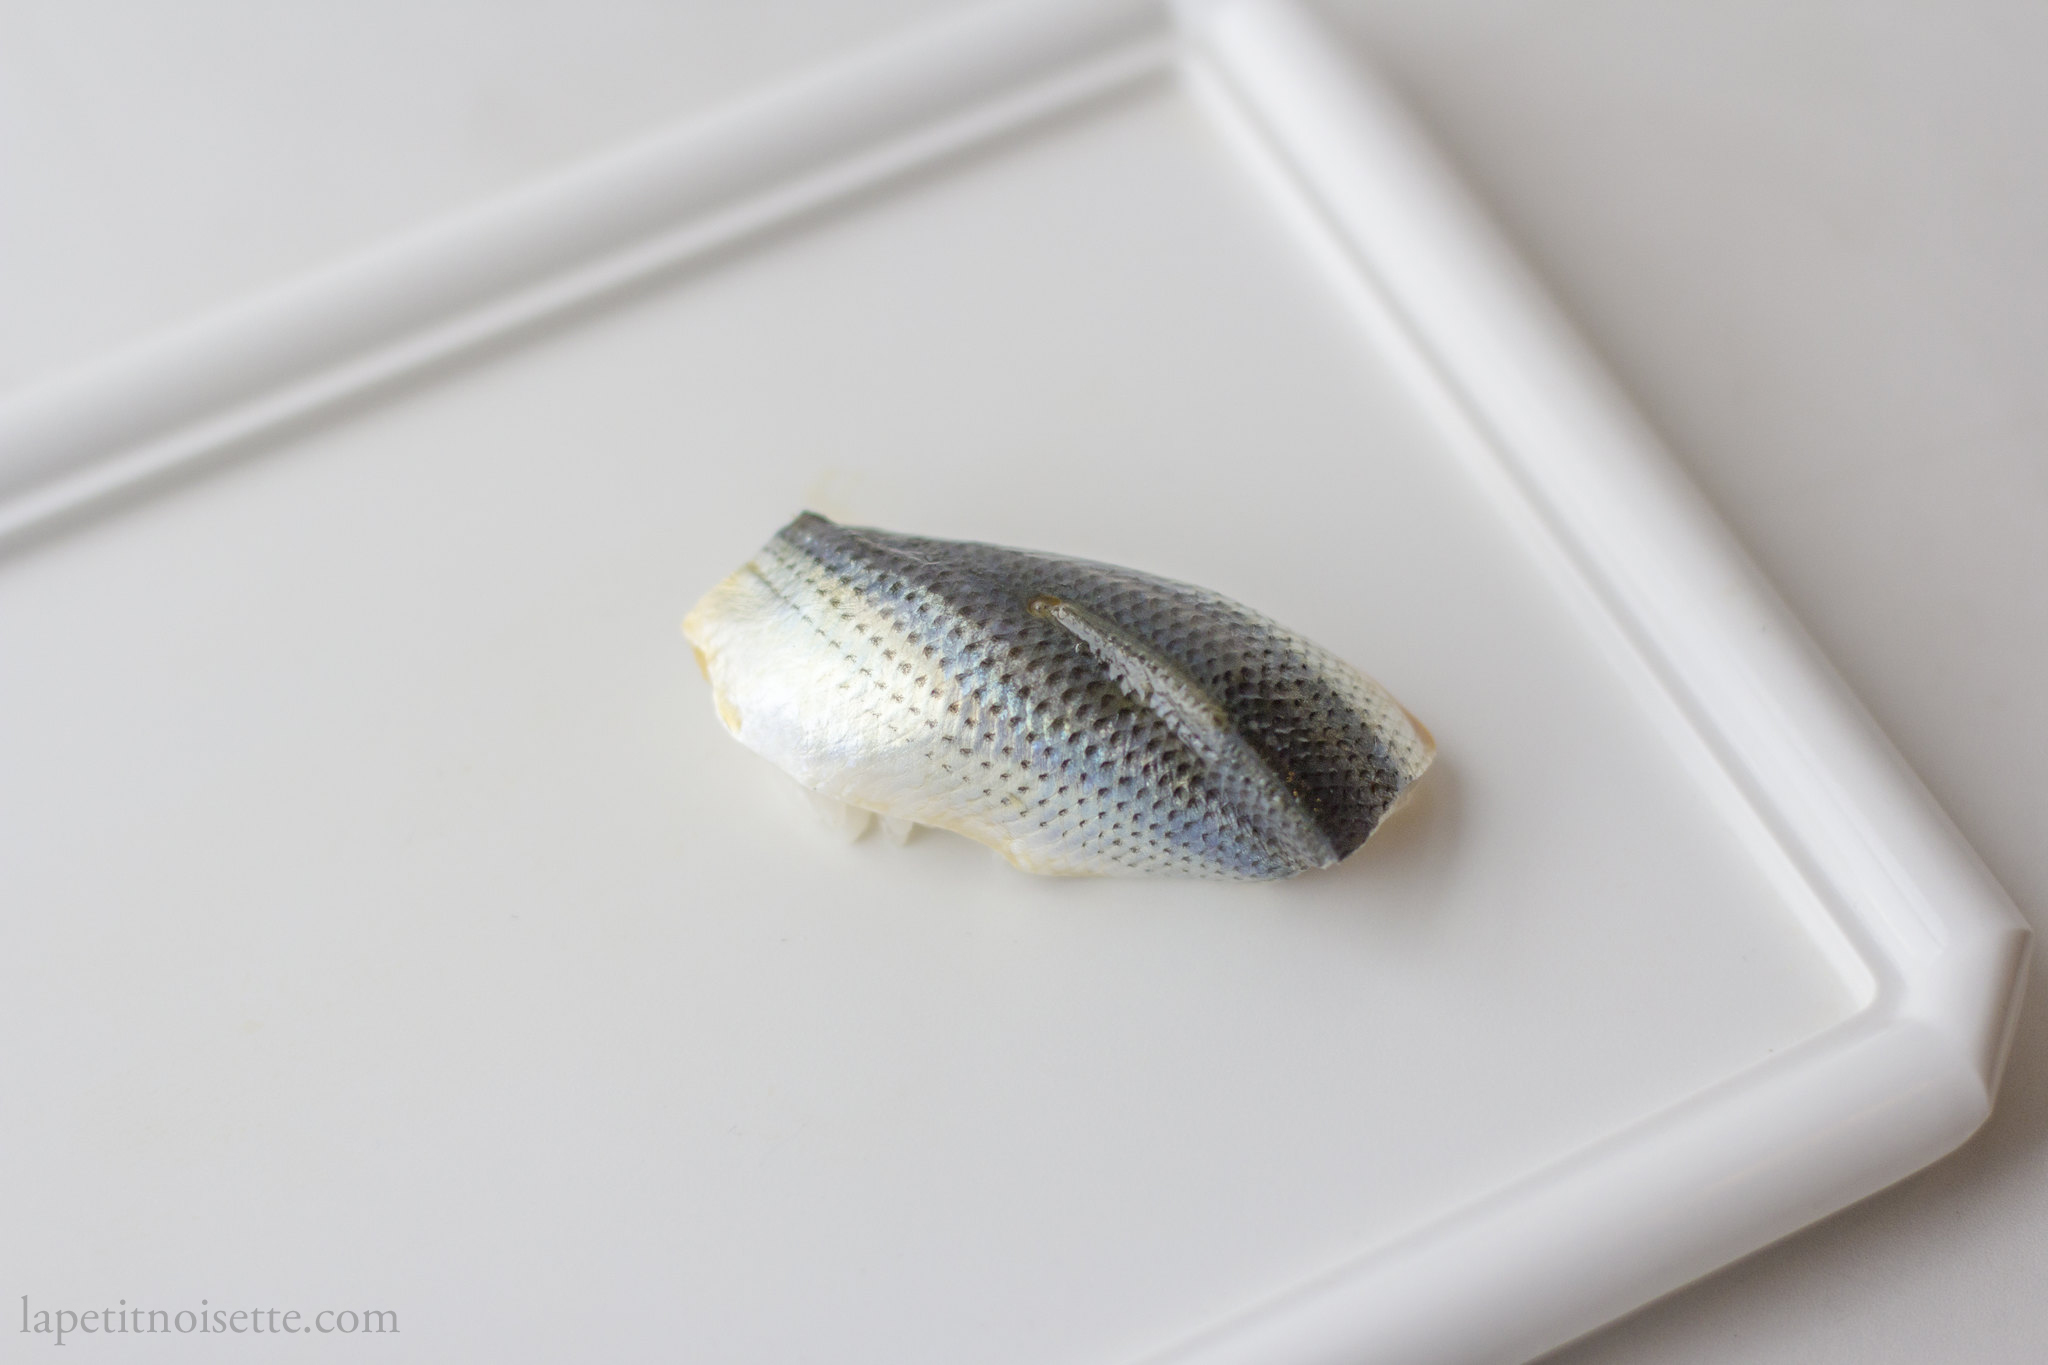 A piece of Gizzard Shad twisted when made into sushi to express liveliness.